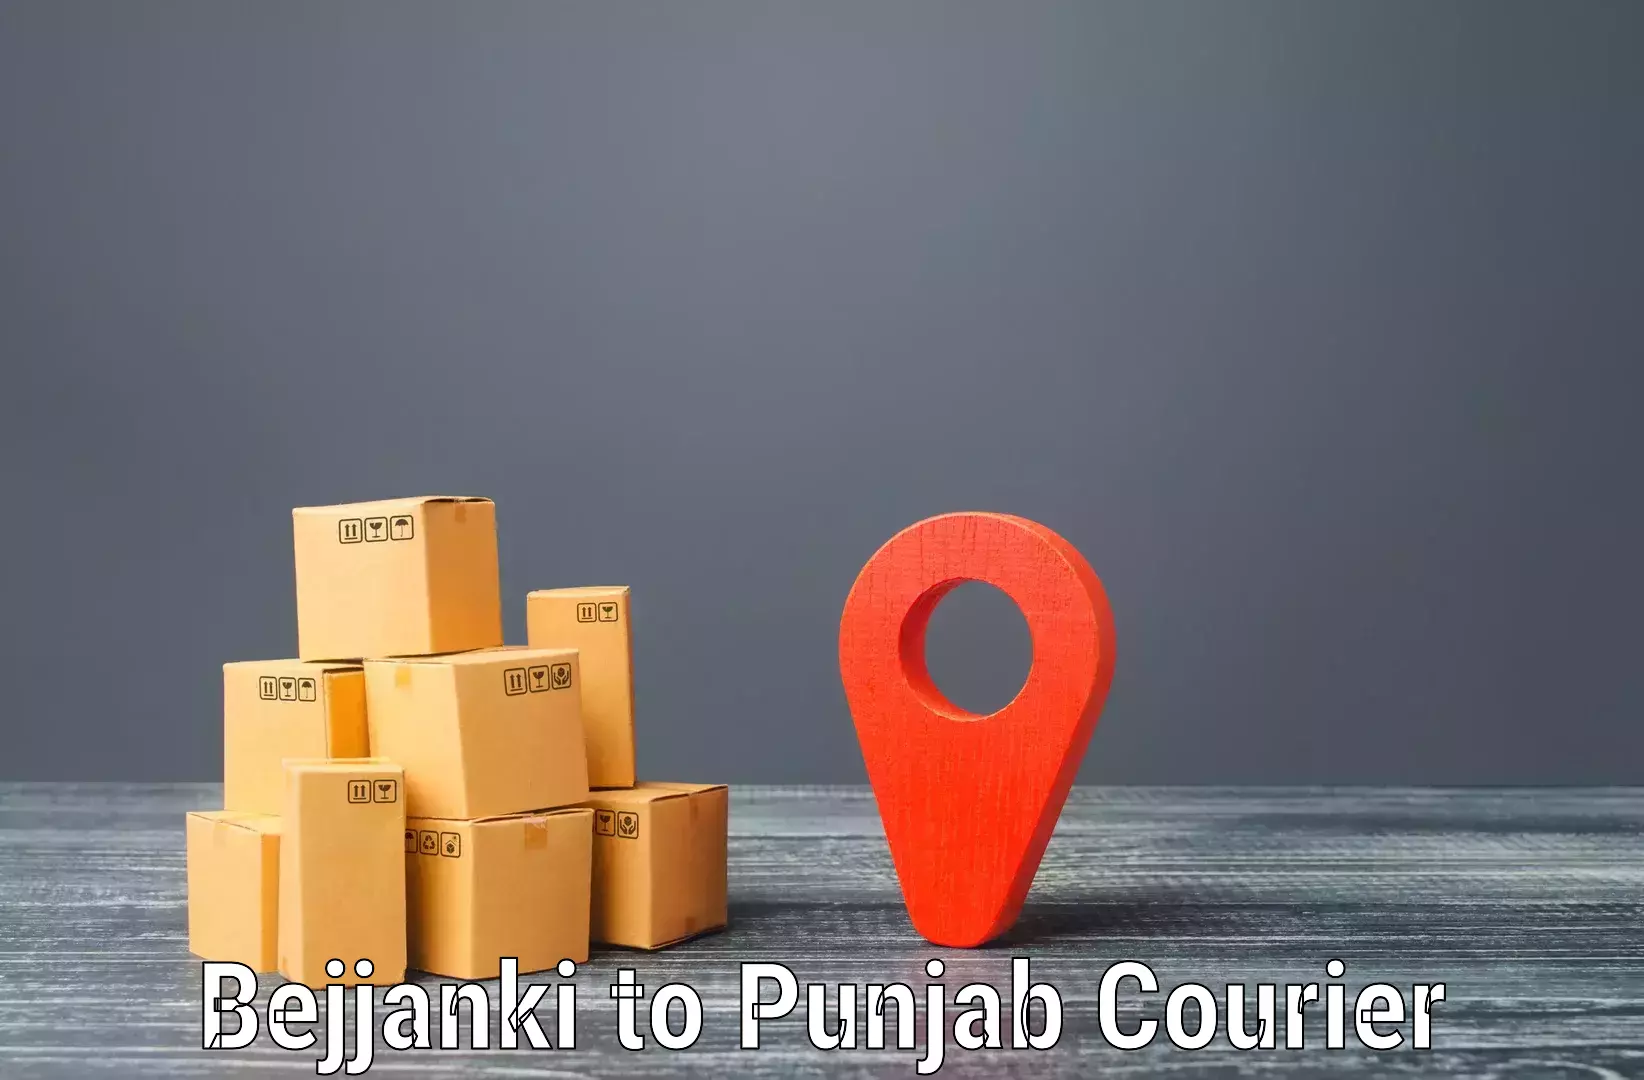 Express logistics service in Bejjanki to Malout